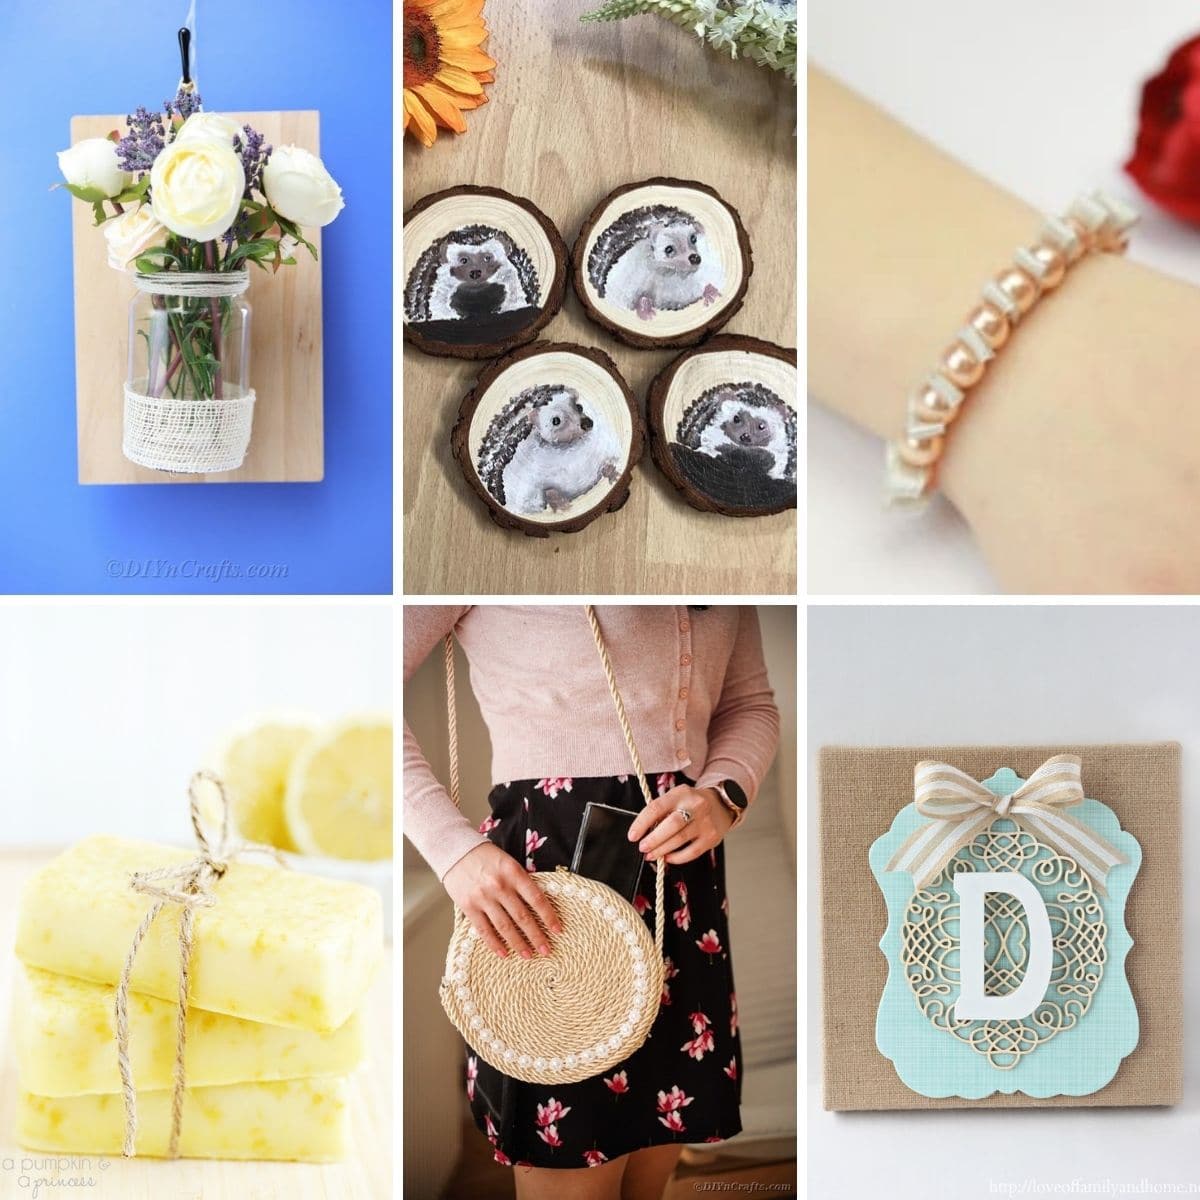 25 Great Handmade Gifts for Women - Crazy Little Projects